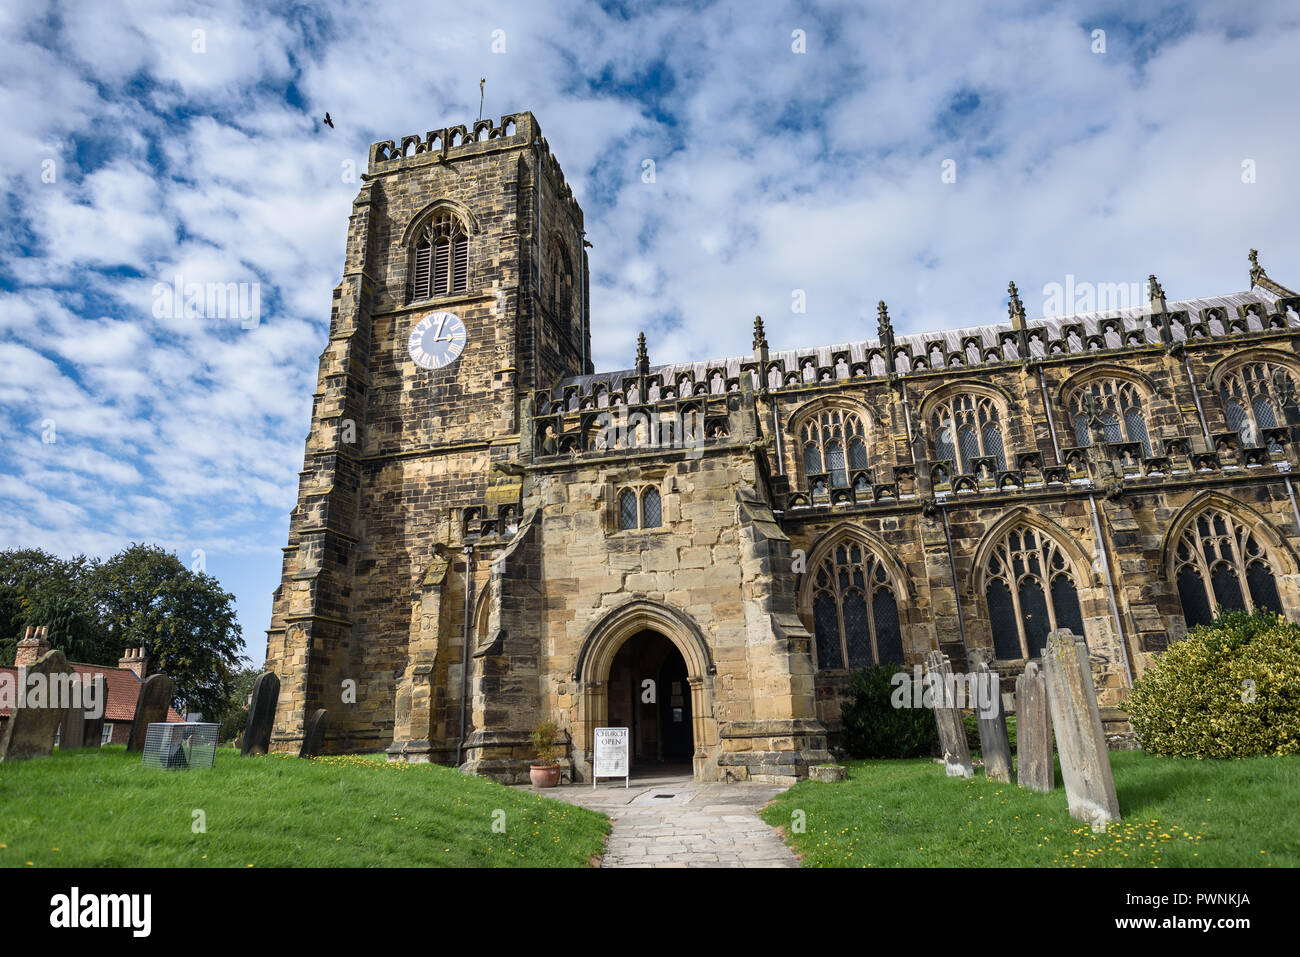 The church of St Mary, dating from 15th century, in the market town of Thirsk, North Yorkshire, UK Stock Photo